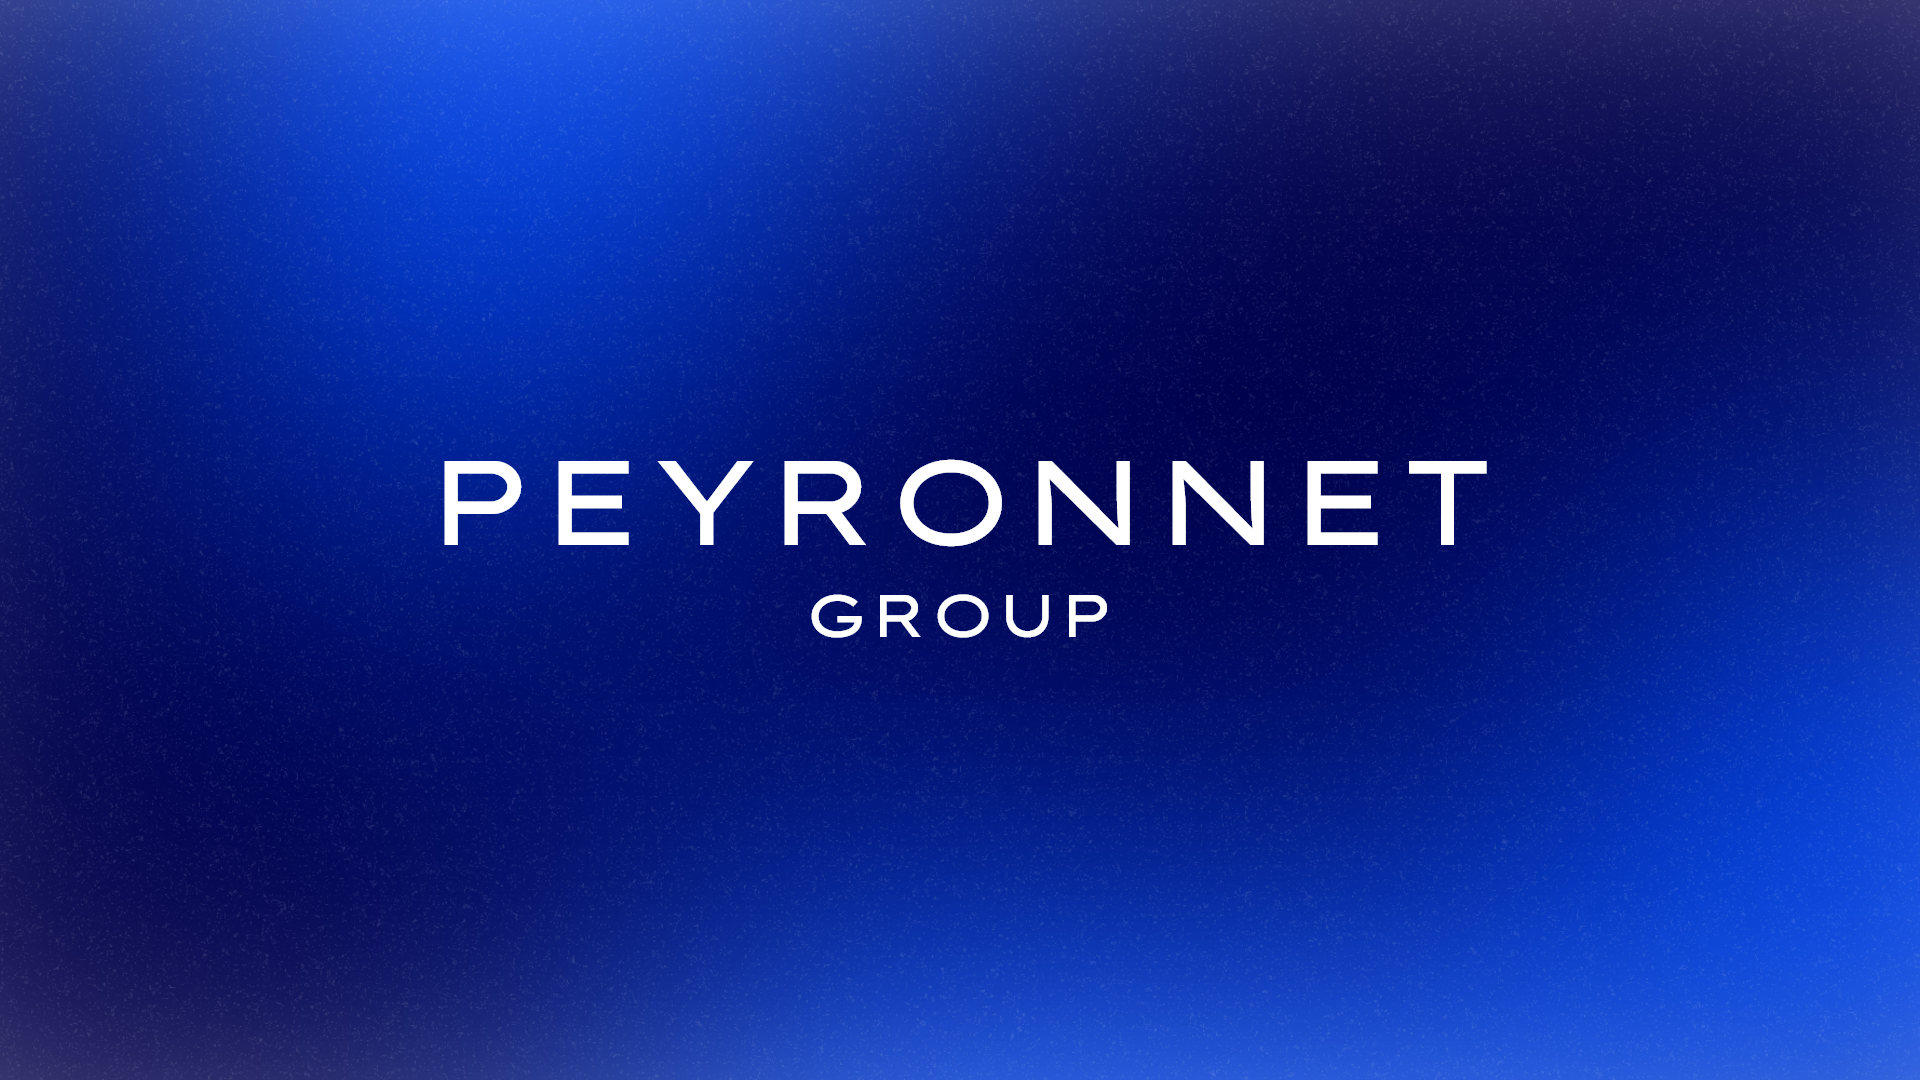 Introducing The Peyronnet Group